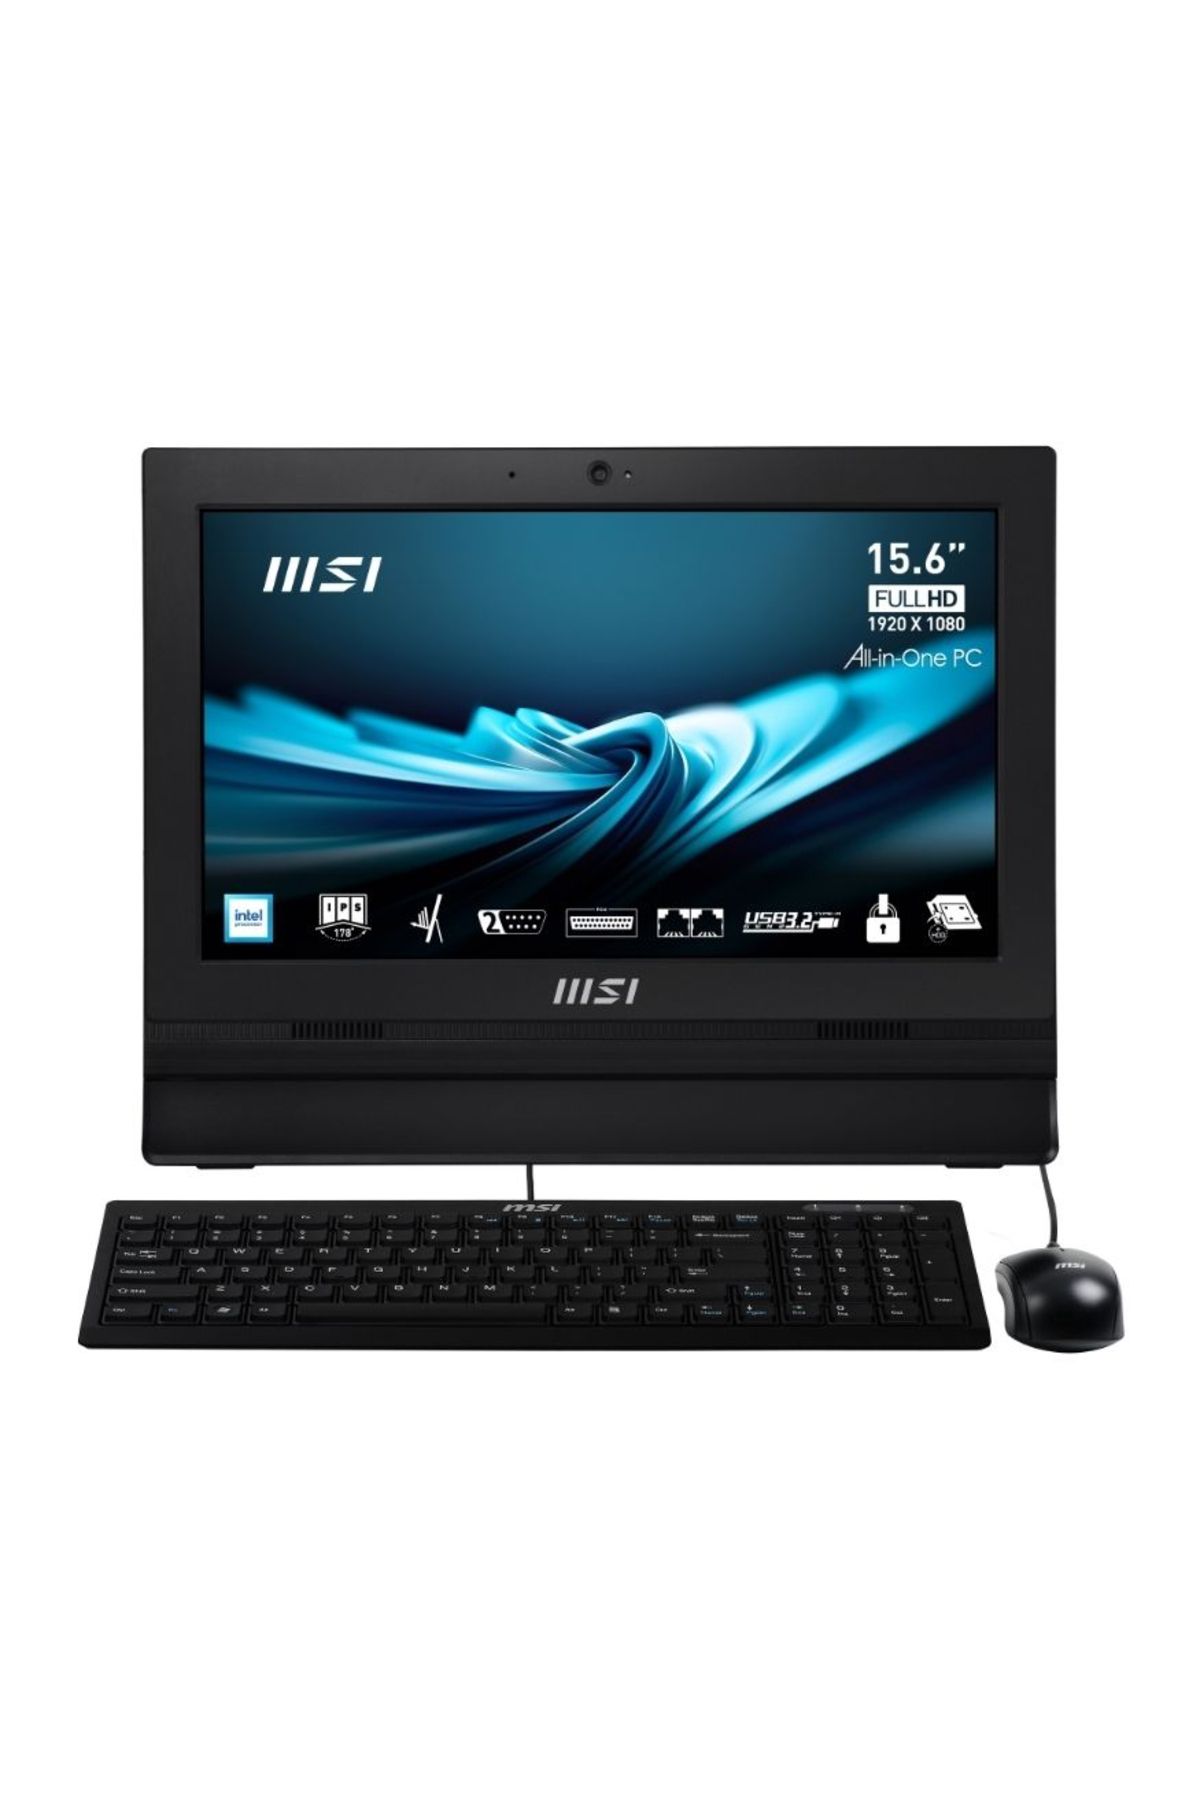 MSI Pro Ap162t Adl-002xtr 15.6" Fhd 16:9 (1920X1080) N100 4gb Ddr4 128gb Ssd Dos Touch All In One Pc